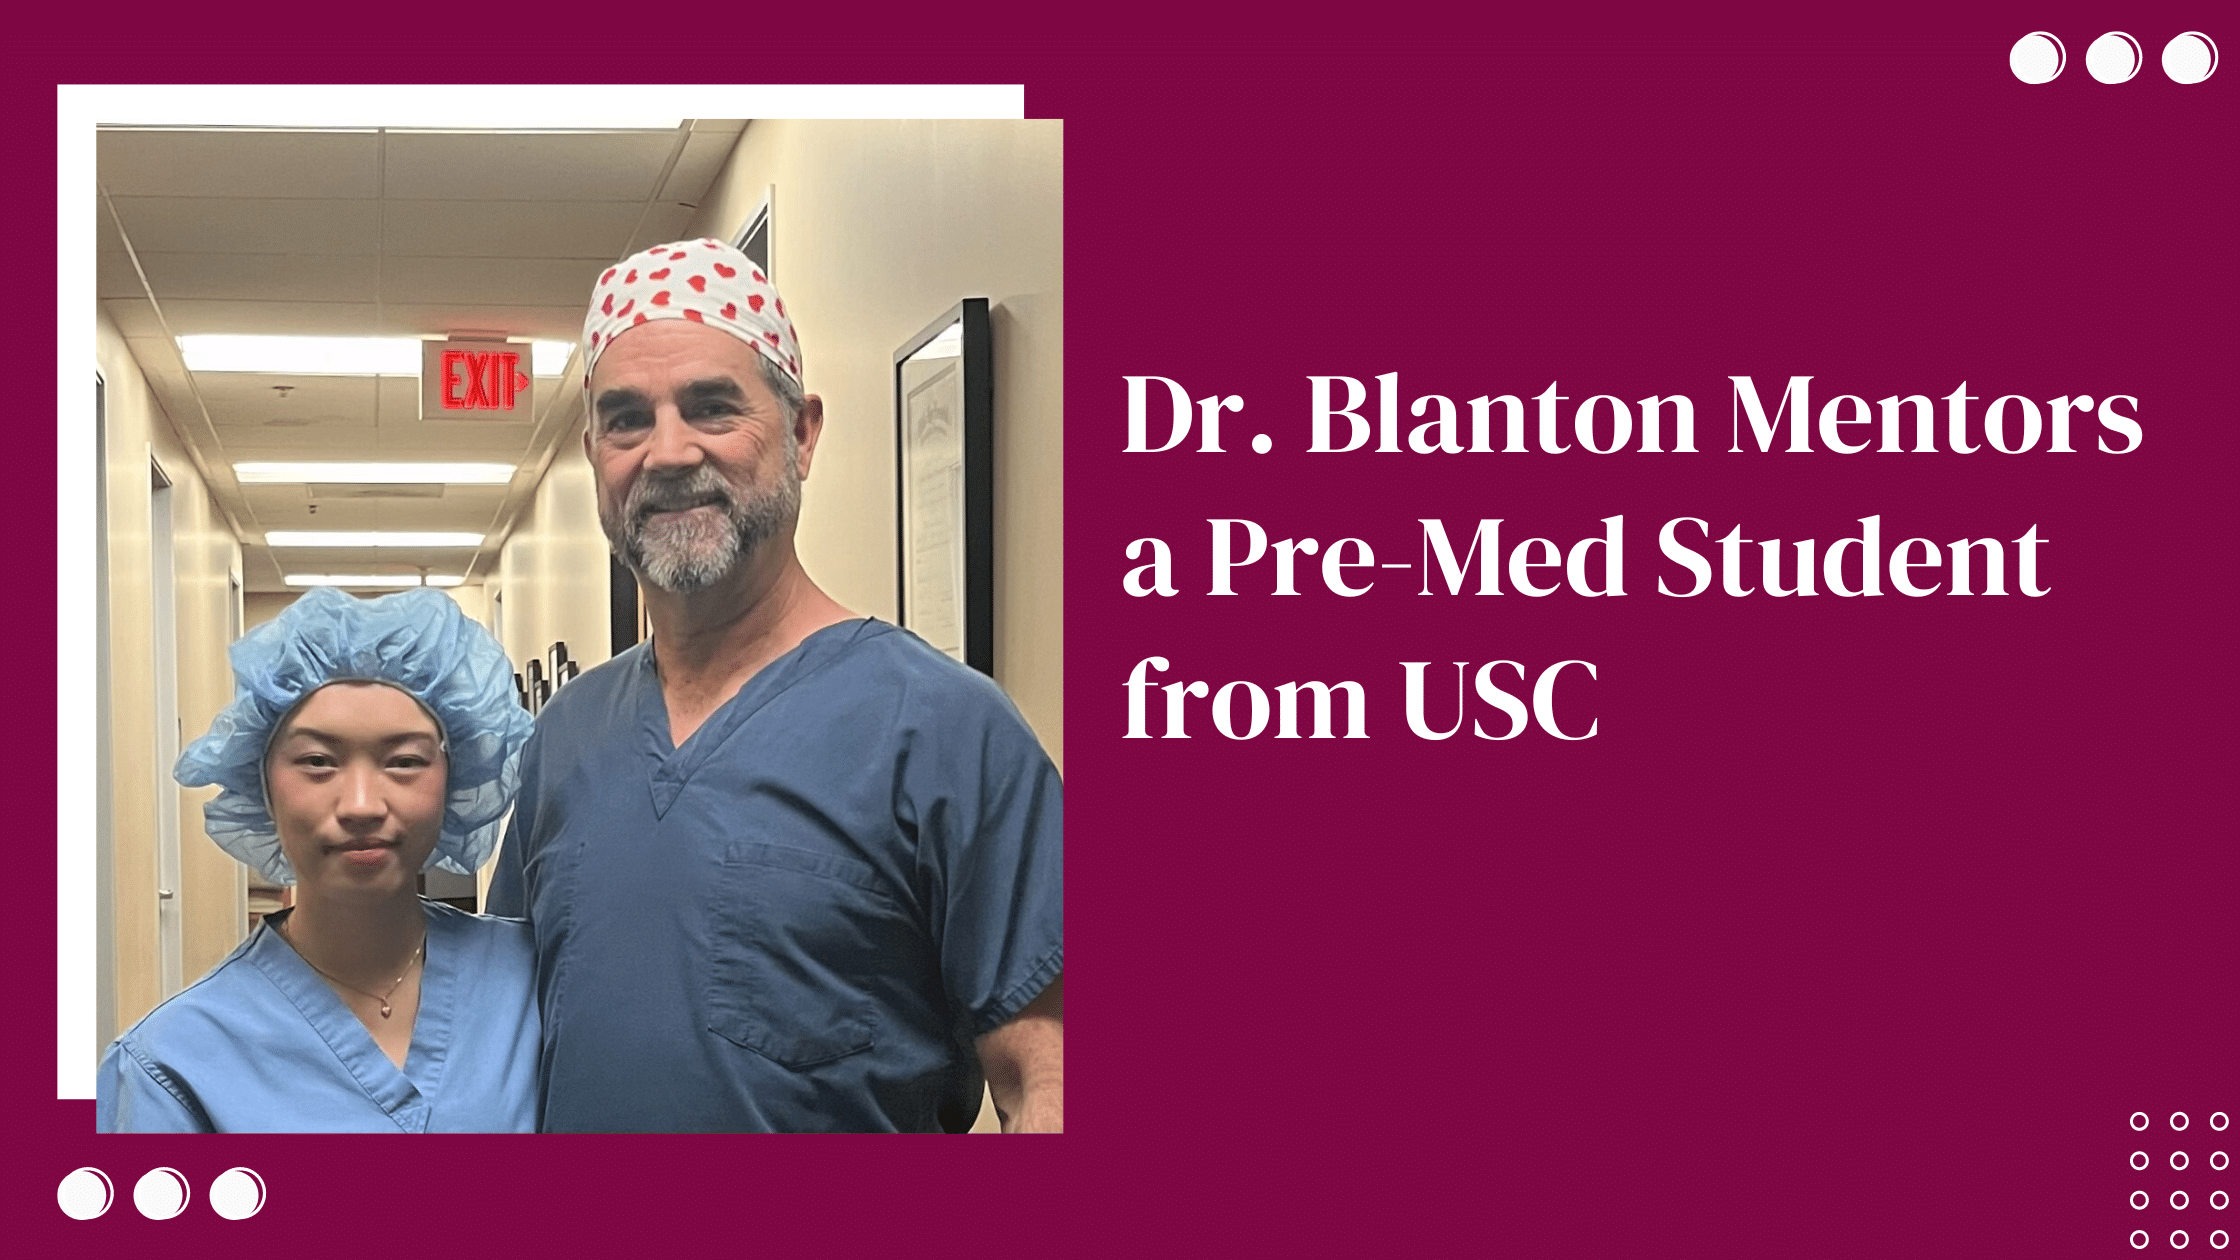 Dr. Blanton Mentors a Pre-Med Student from USC